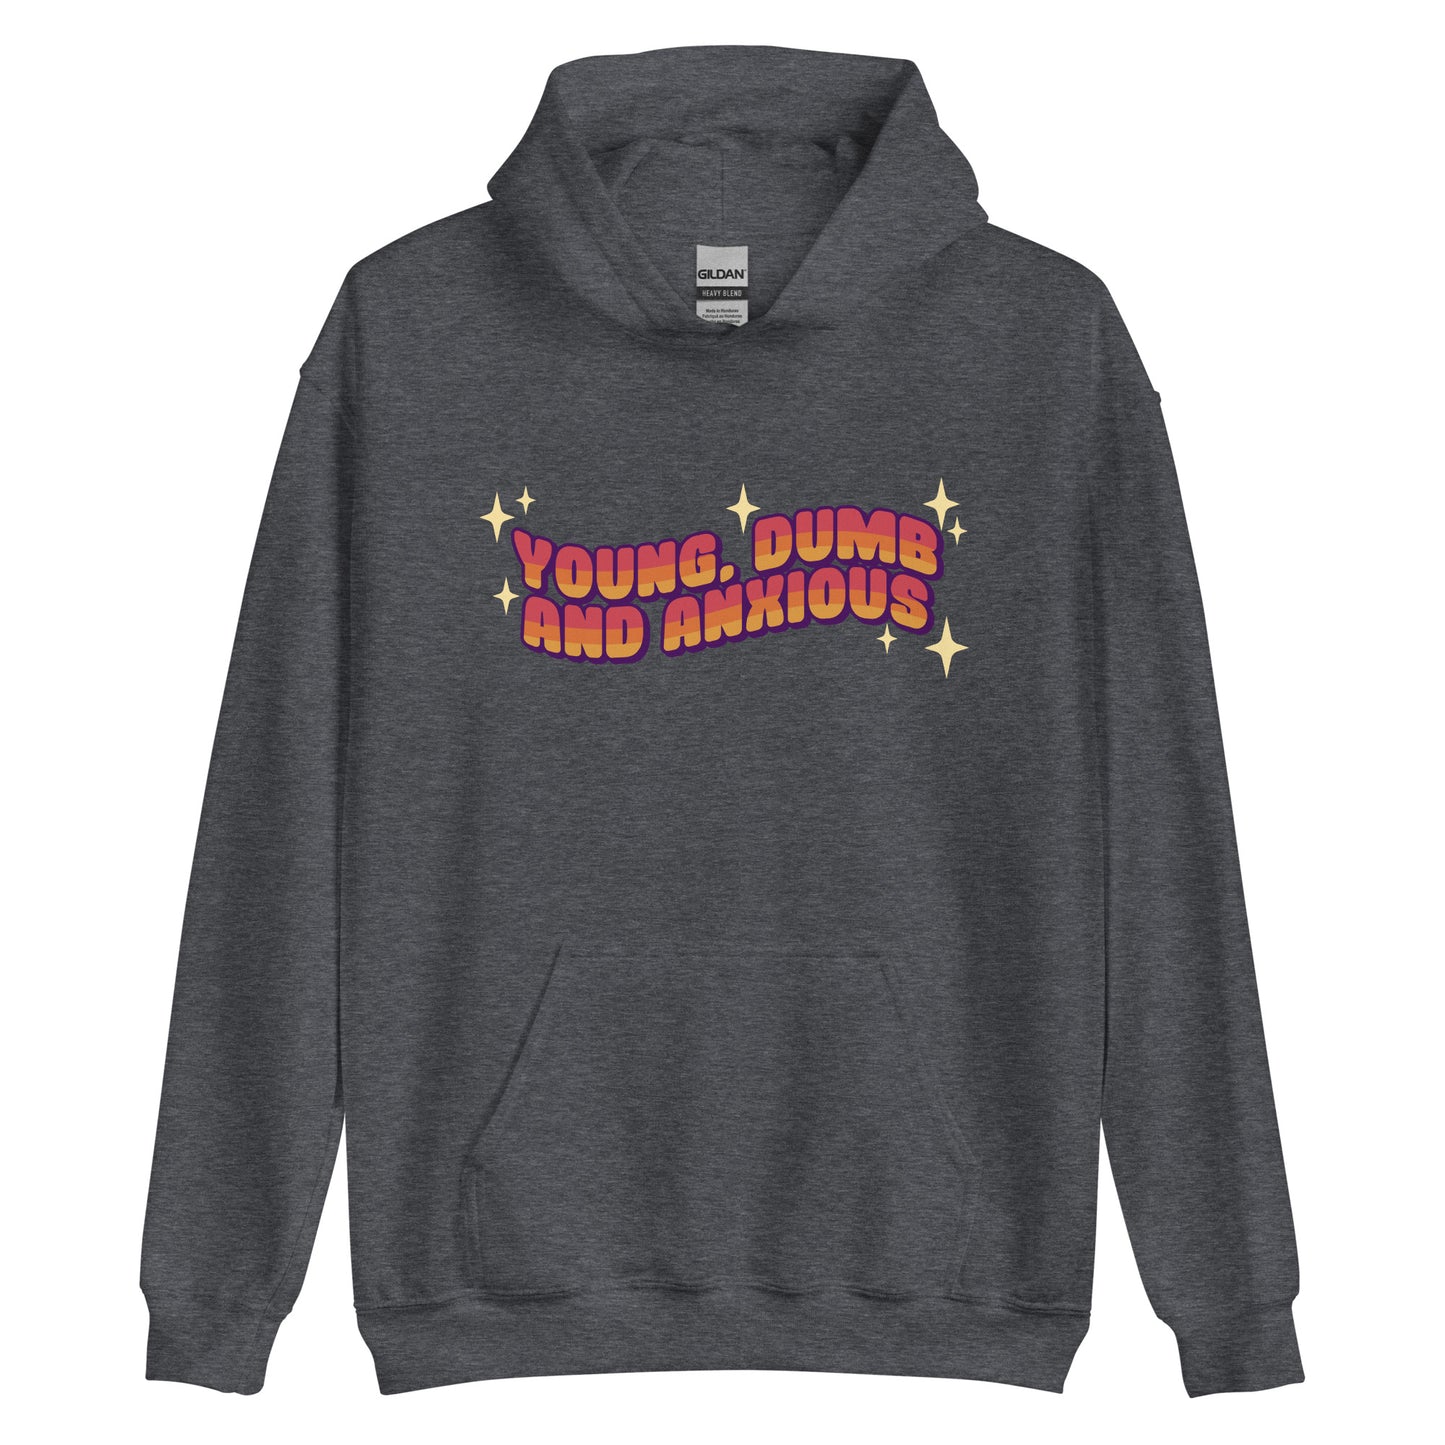 A dark grey hooded sweatshirt featuring text in a pink-to-yellow gradient, surrounded by sparkles. The text reads "Young, dumb and anxious" in a blocky font.